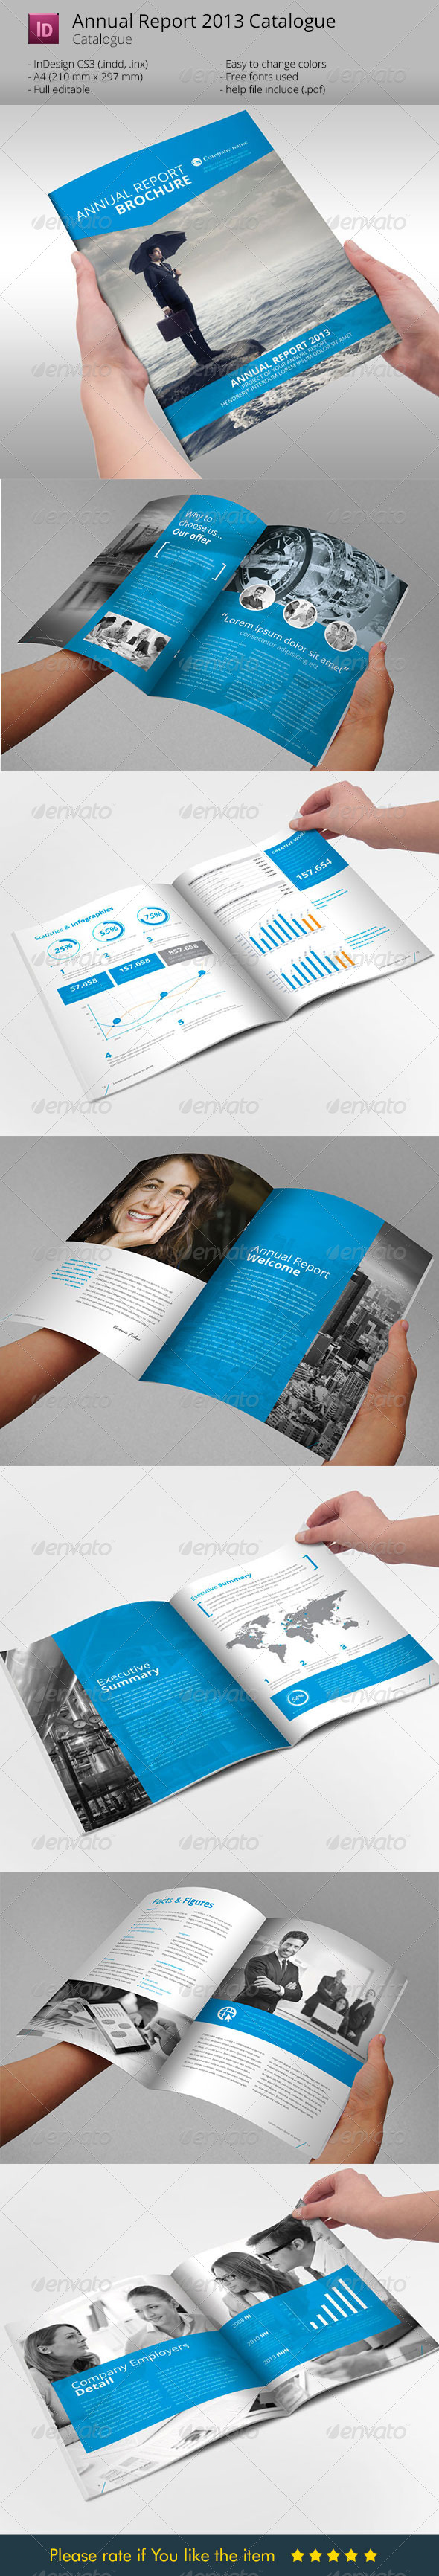 Annual Report  Brochure Indesign Template